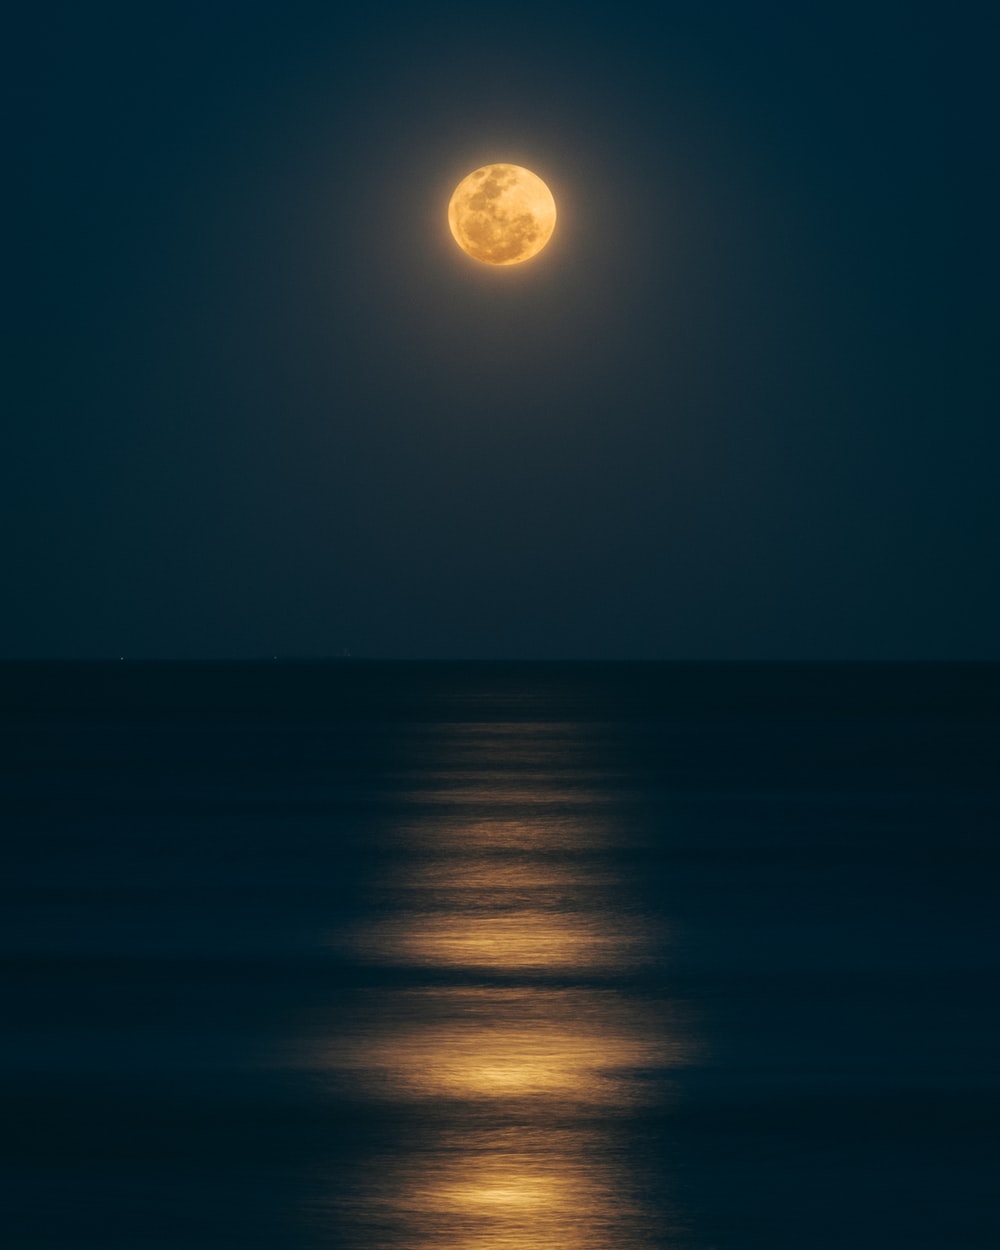 Night Moon Picture. Download Free Image